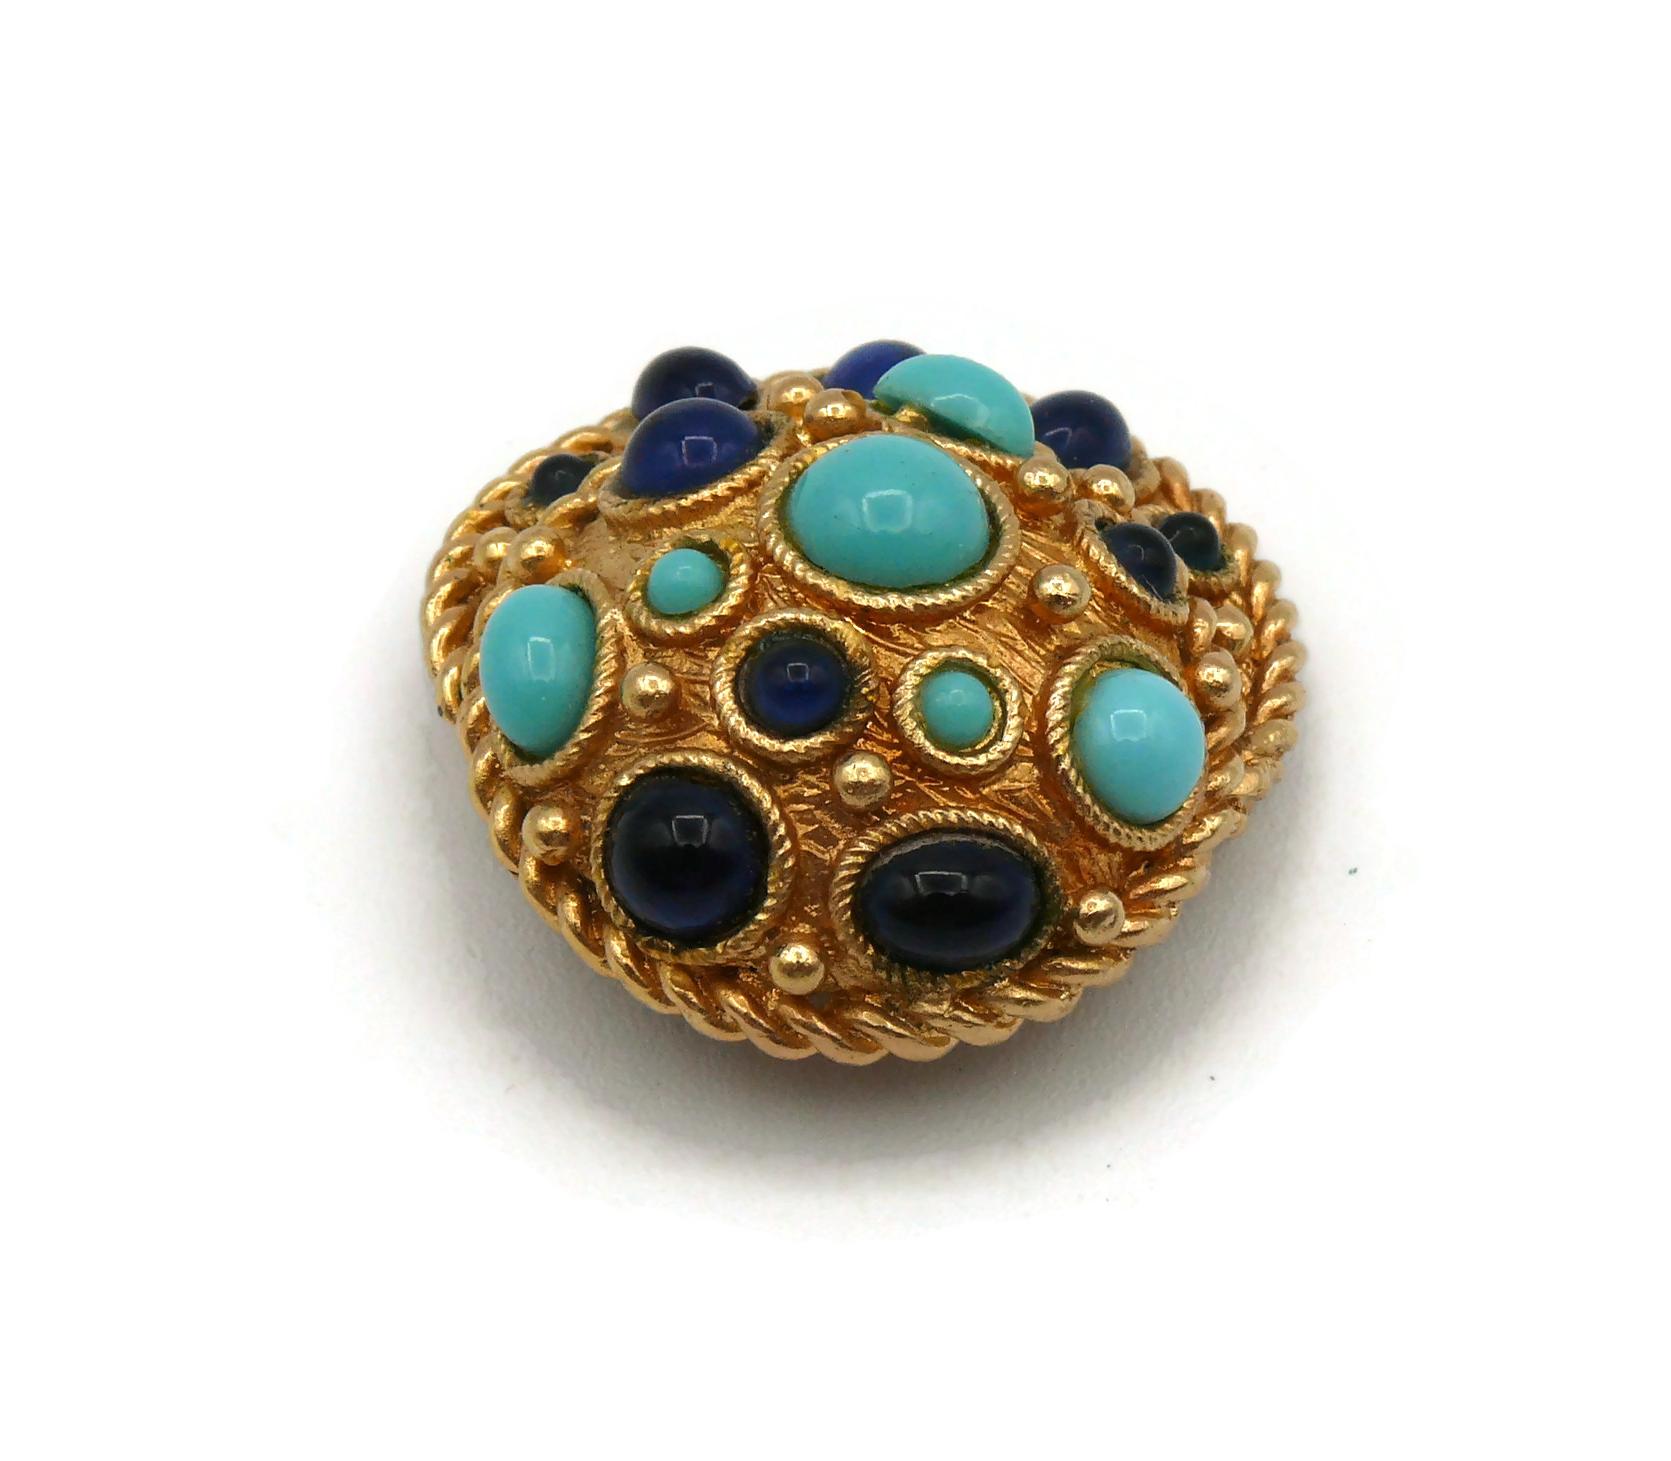 CHRISTIAN DIOR Vintage Gold Toned Jewelled Brooch, 1967 In Good Condition For Sale In Nice, FR